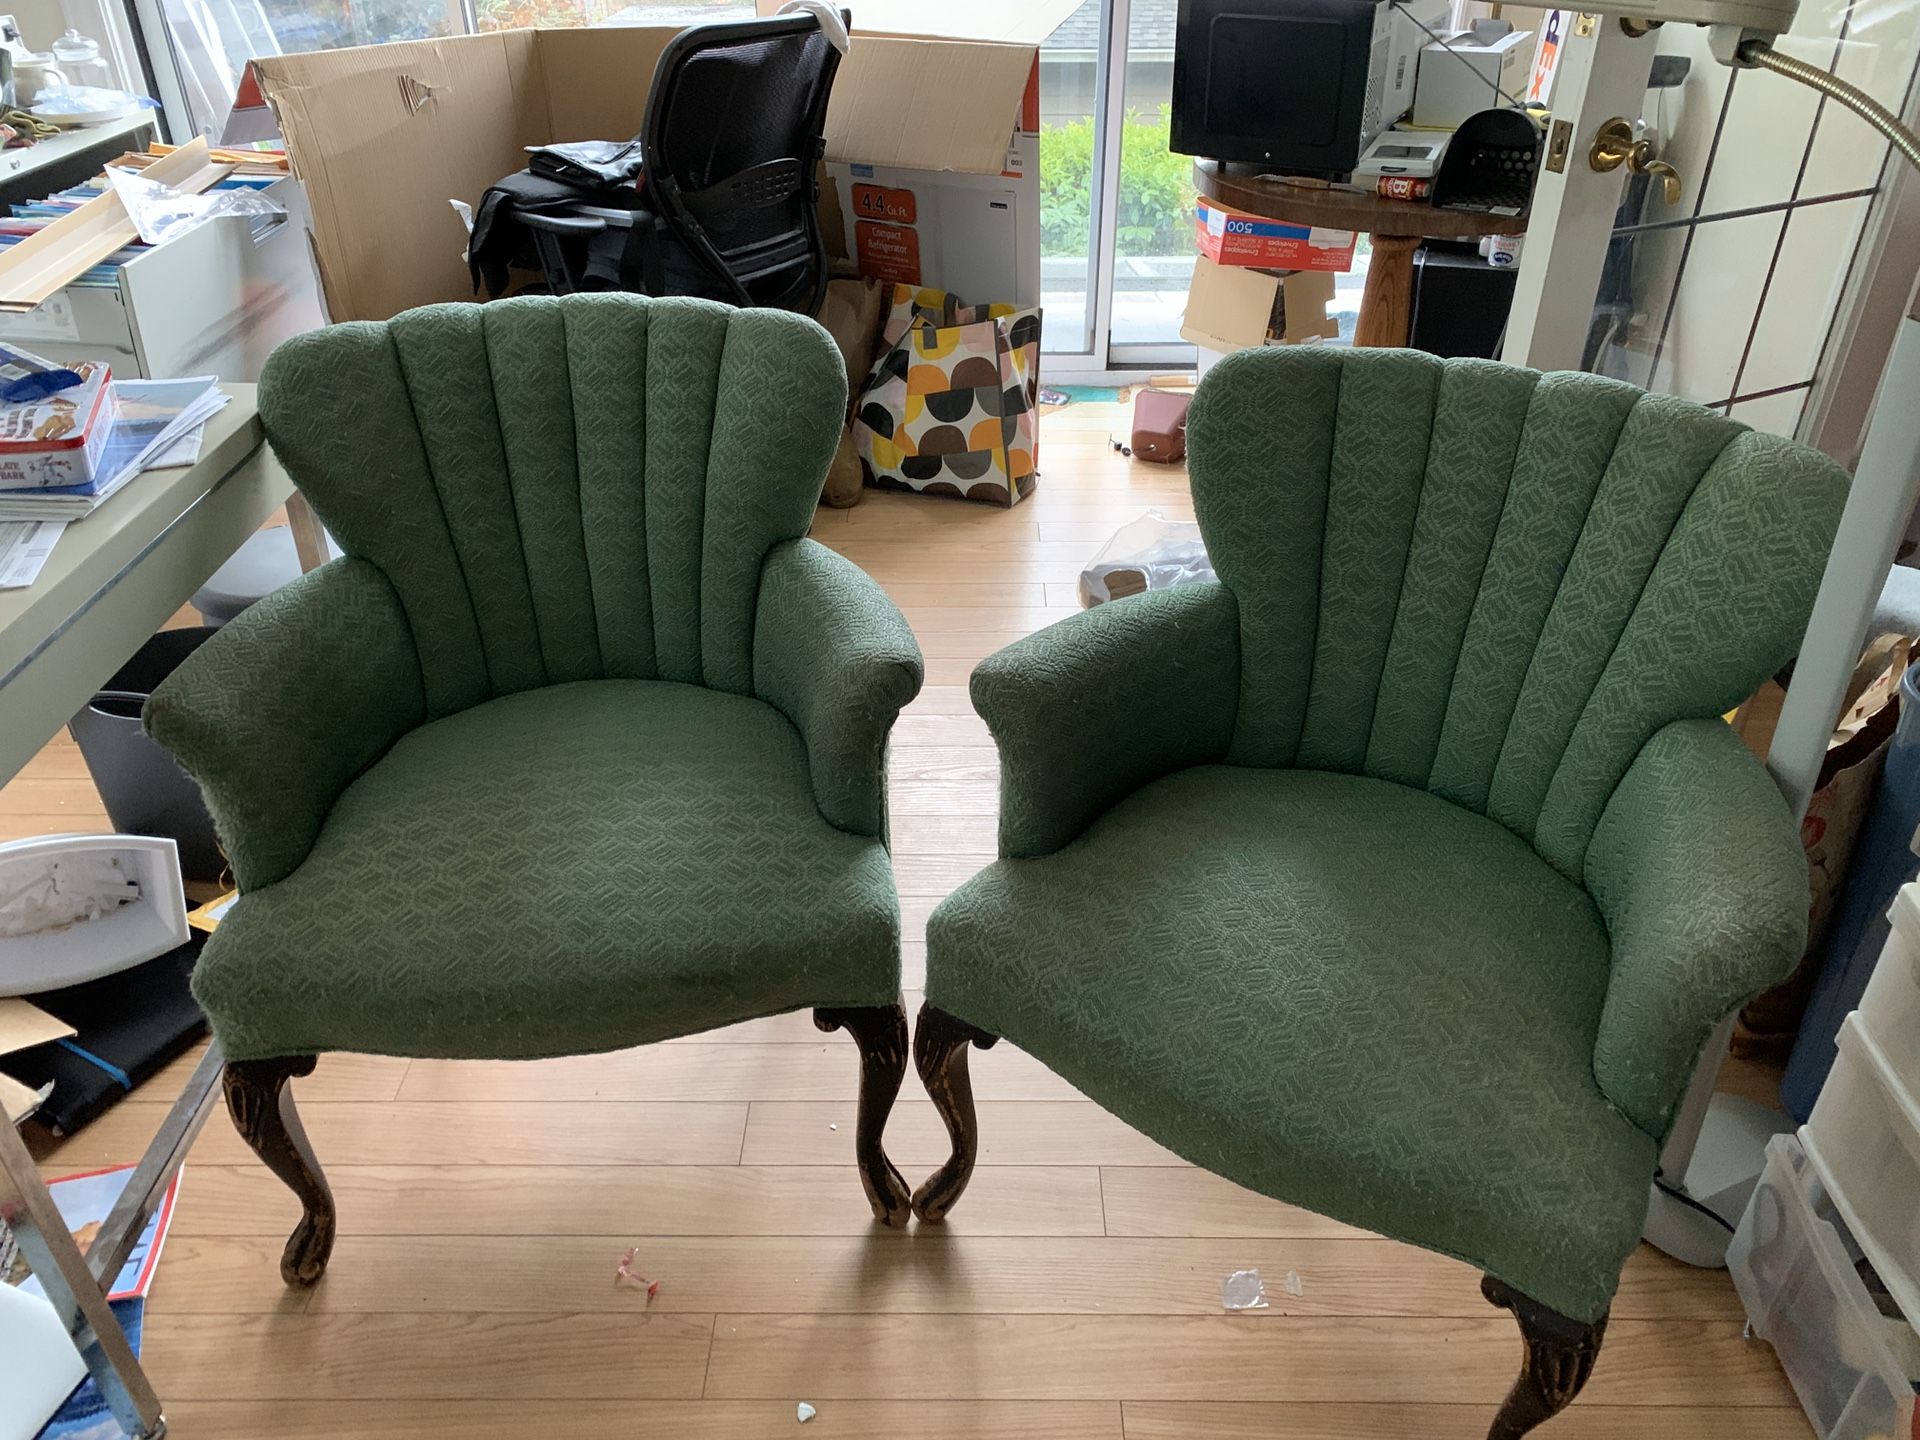 Free upholsteried chairs plus other furniture and mini refrigerator call Greg {contact info removed}